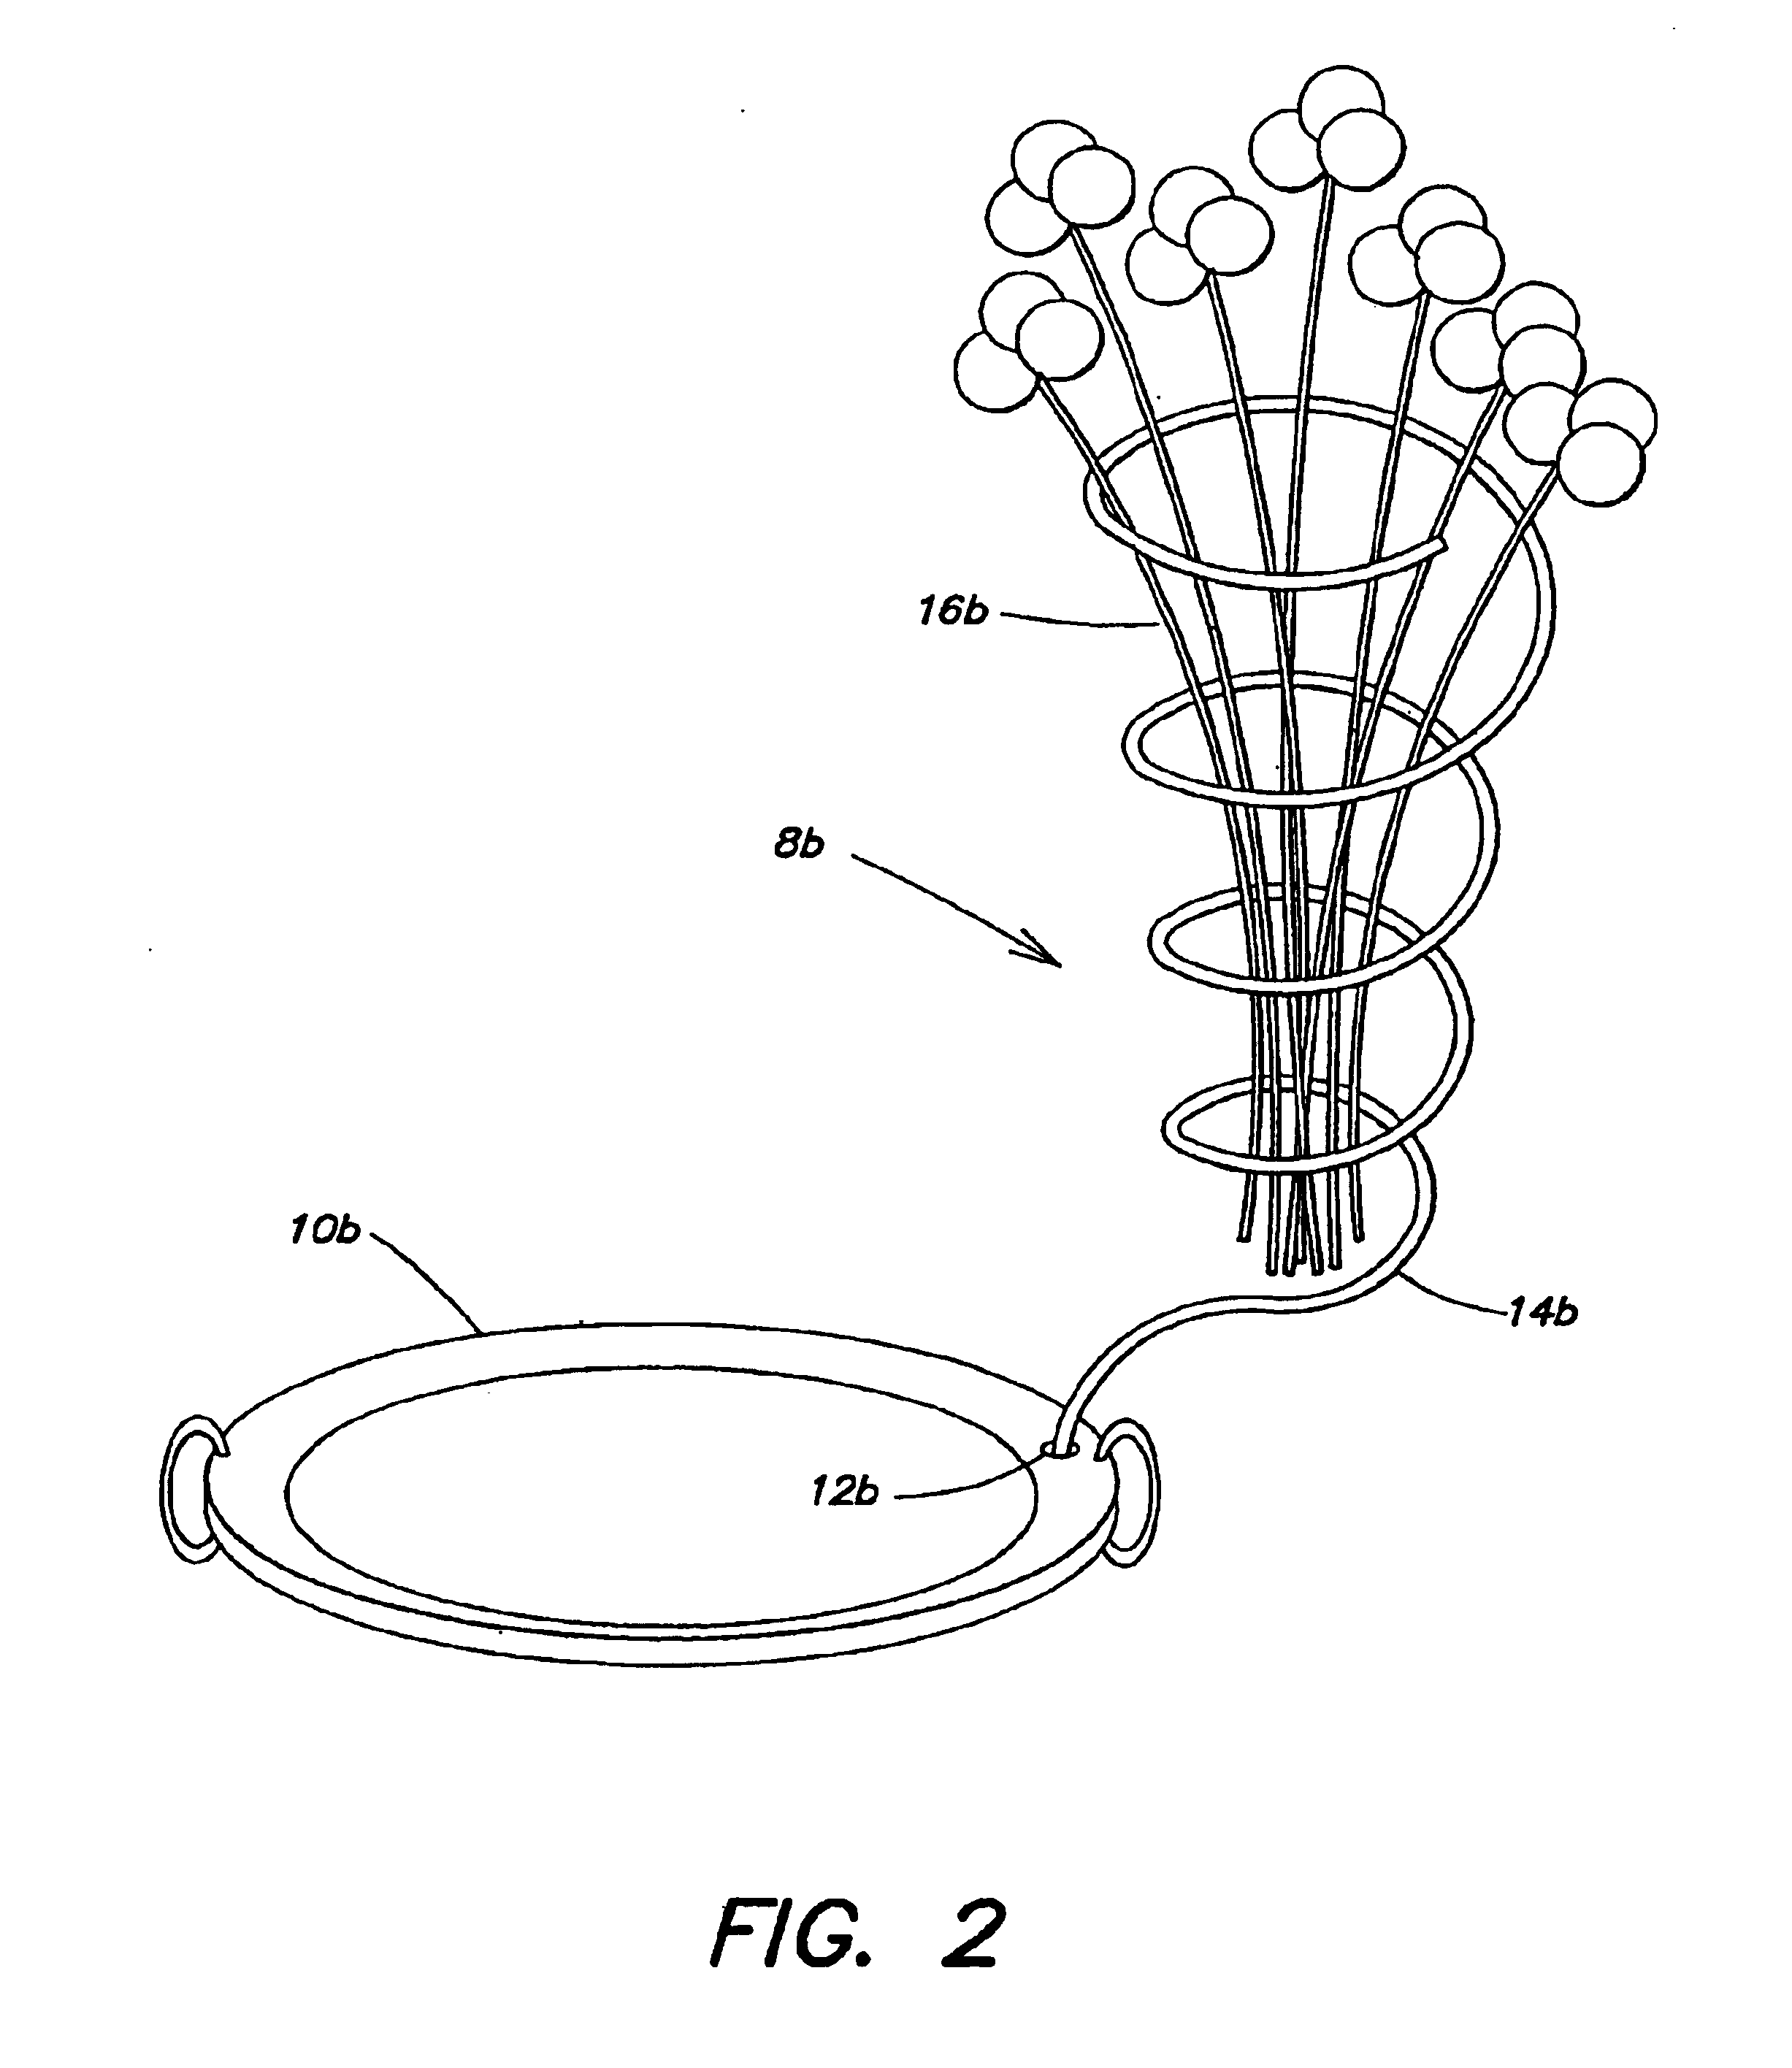 Apparatus for displaying culinary, horticultural or floral items